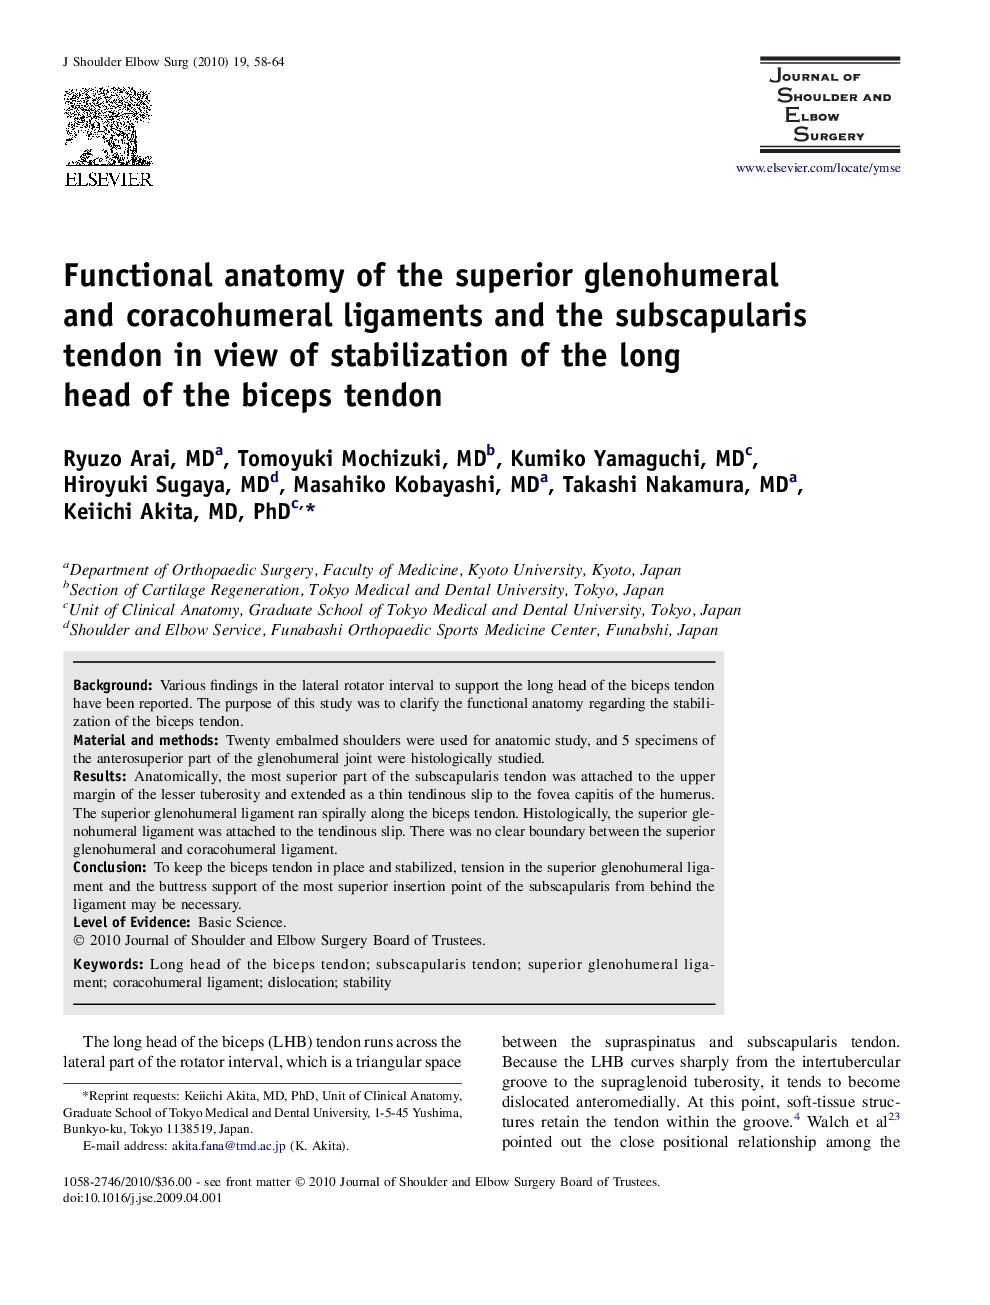 Functional anatomy of the superior glenohumeral and coracohumeral ligaments and the subscapularis tendon in view of stabilization of the long head of the biceps tendon